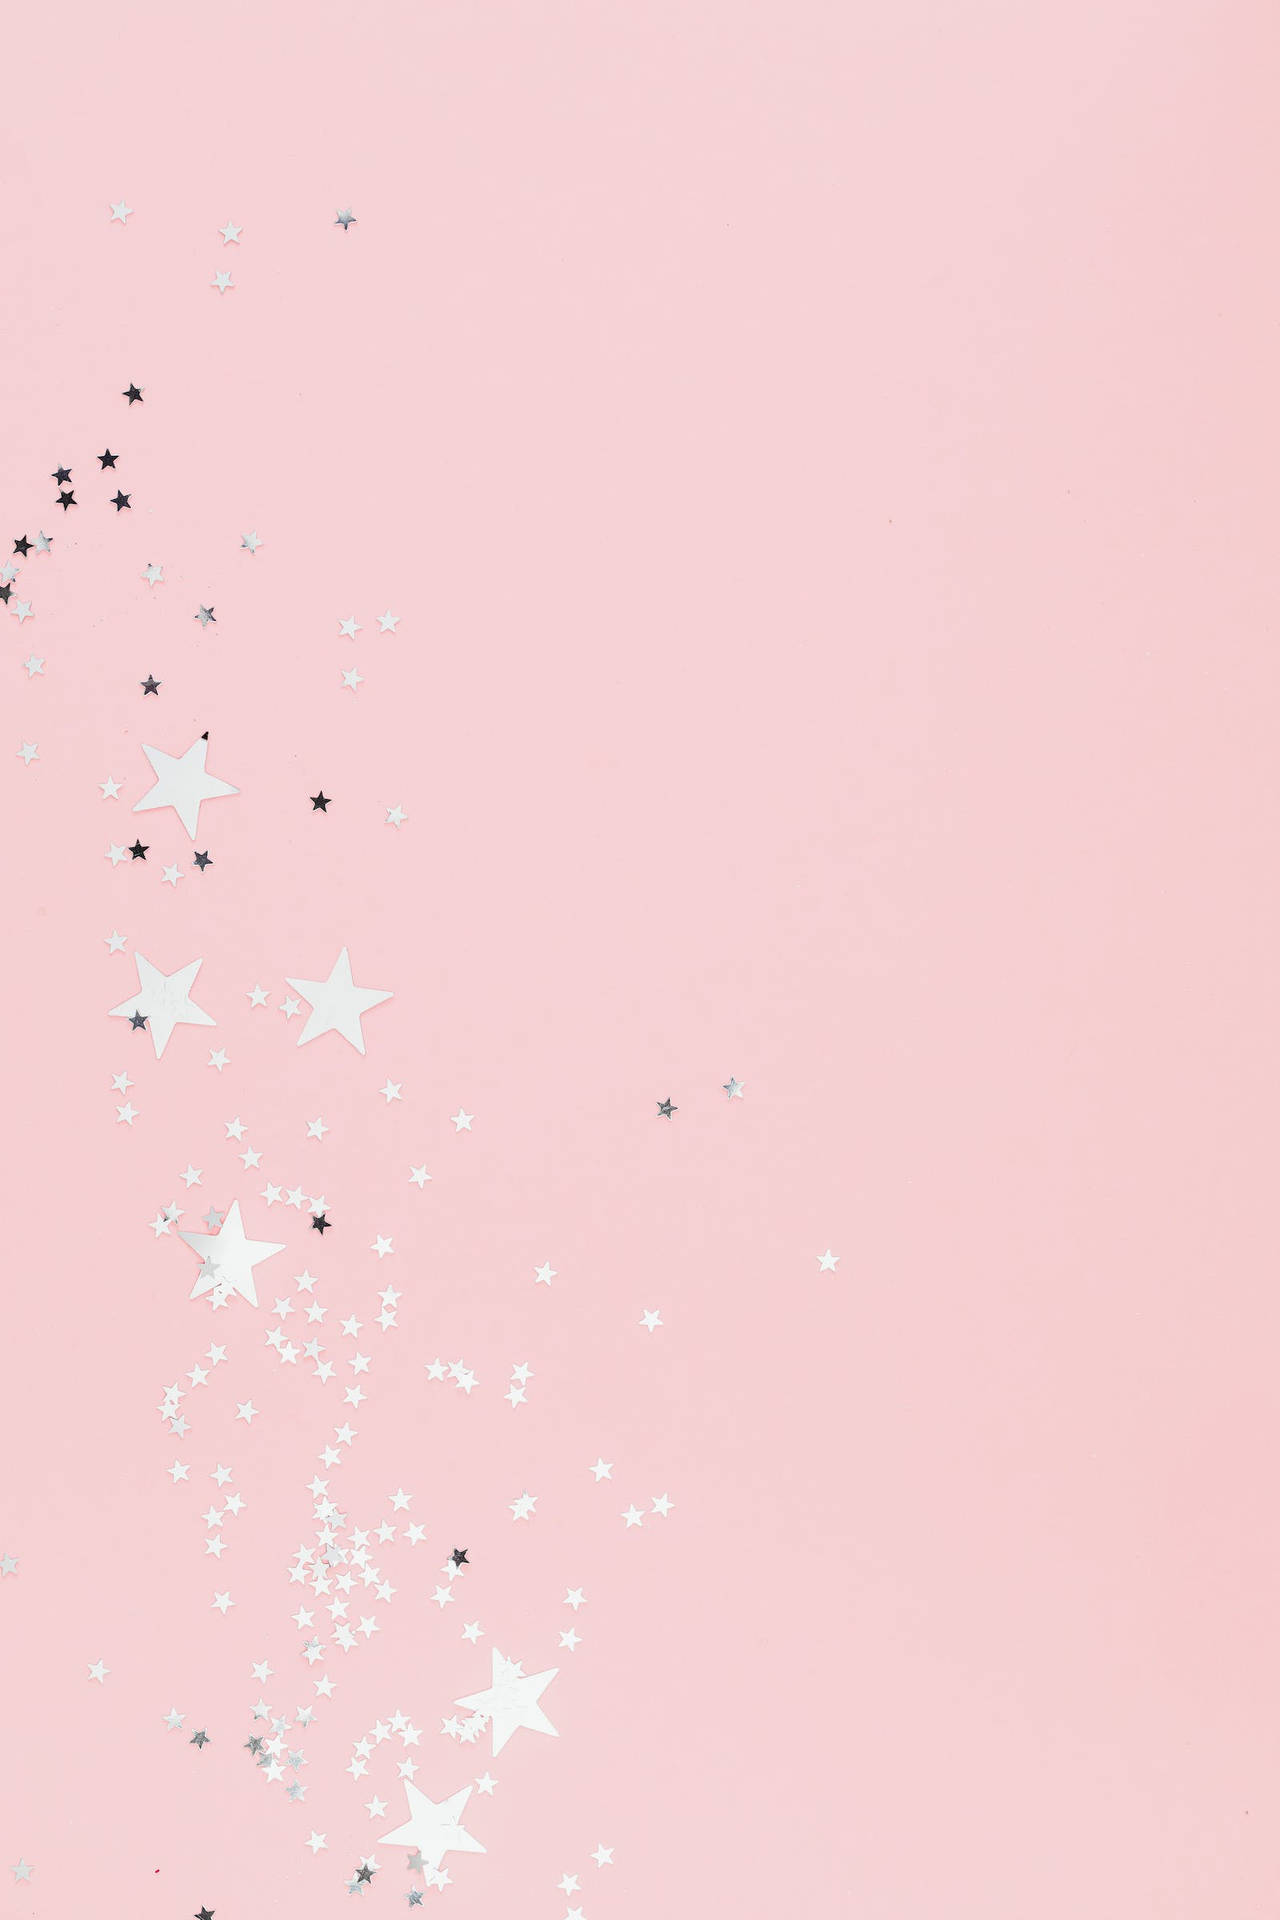 White Star In Pastel Pink Aesthetic Background